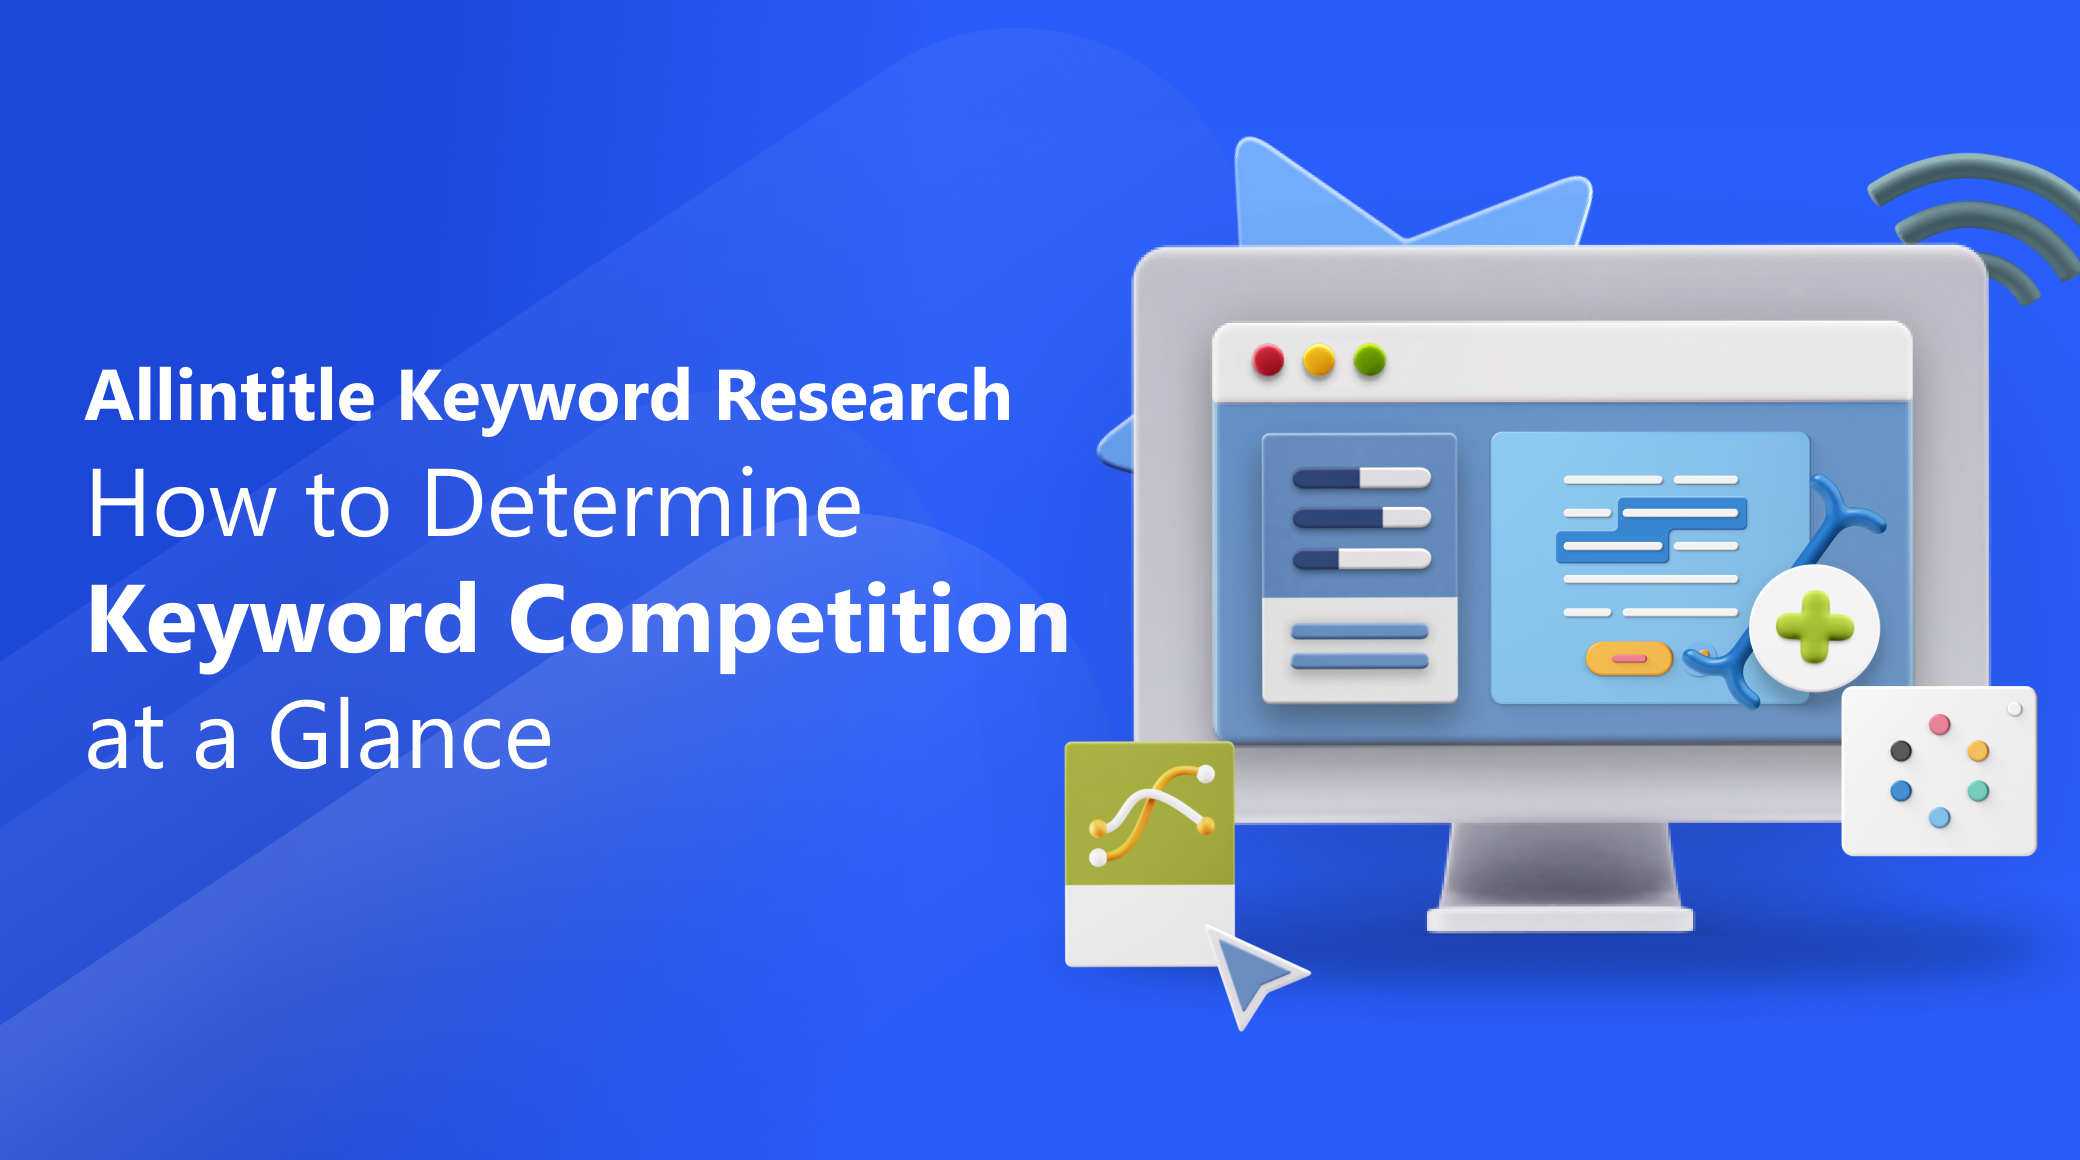 Allintitle Keyword Research— How to Determine Keyword Competition at a Glance